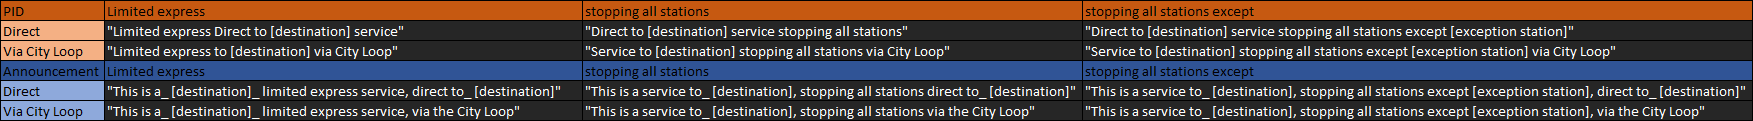 Table showing all PID and announcement combinations of limited express, stopping all, stopping all except one, against direct and via city loop